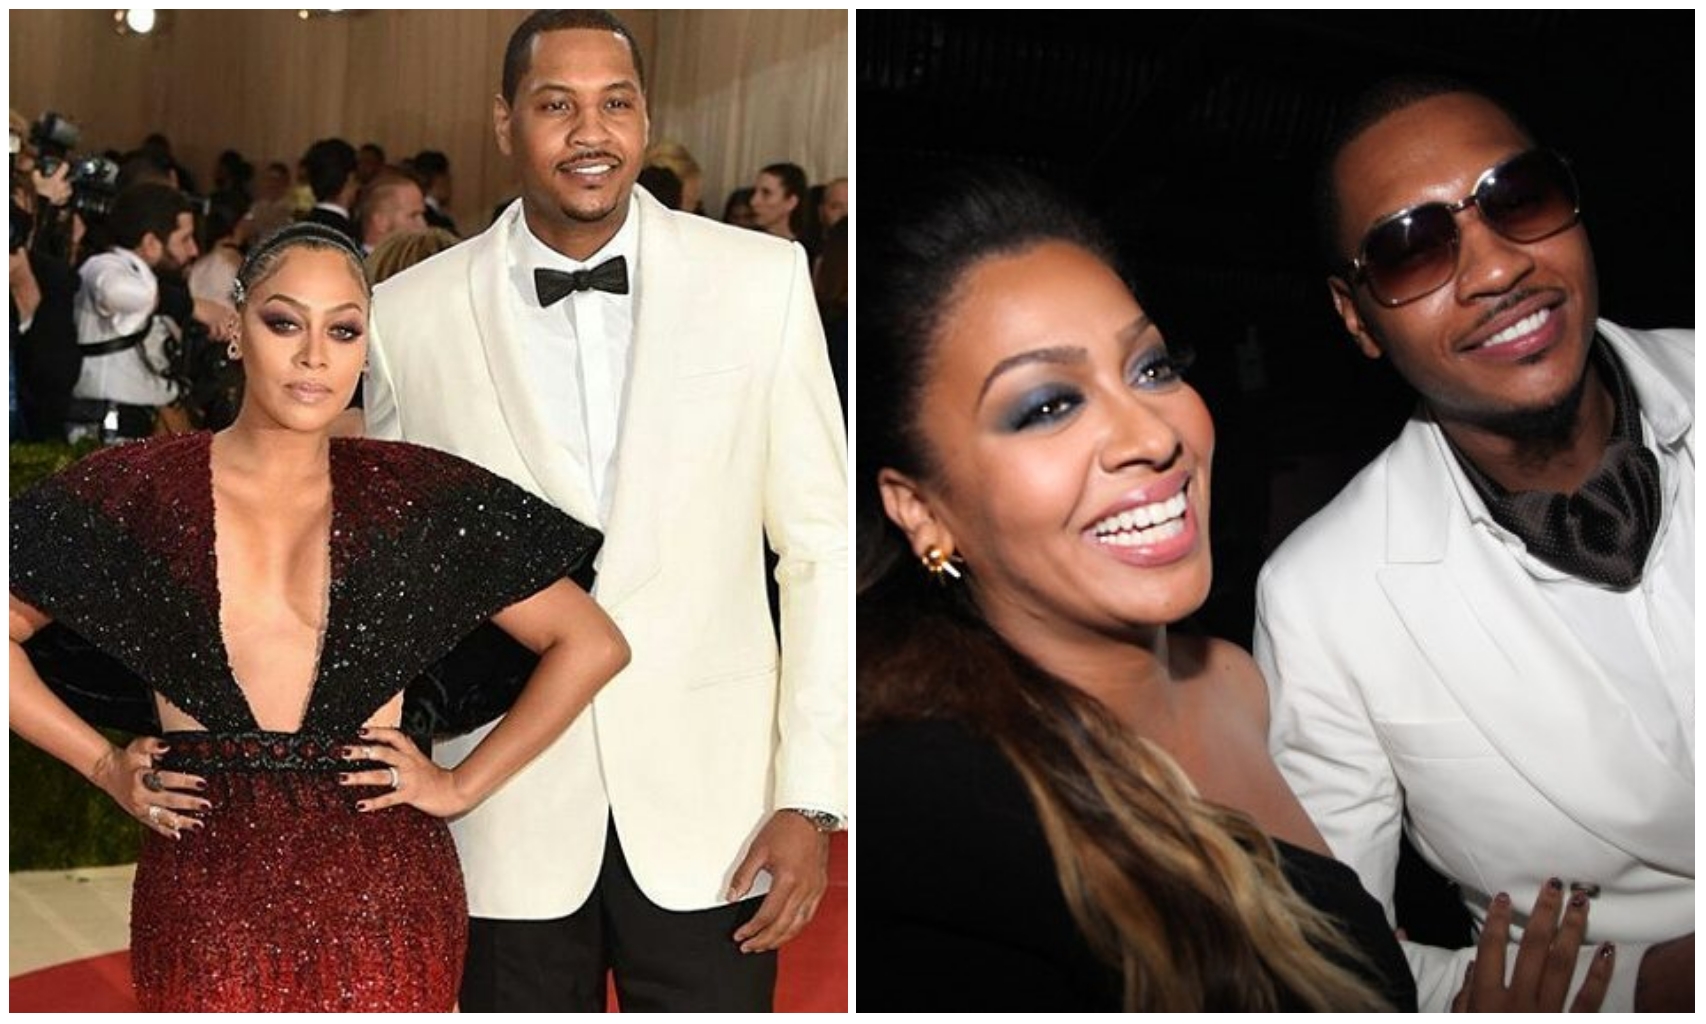 Carmelo Anthony pens heartfelt message to LaLa Anthony on their 10th anniversary